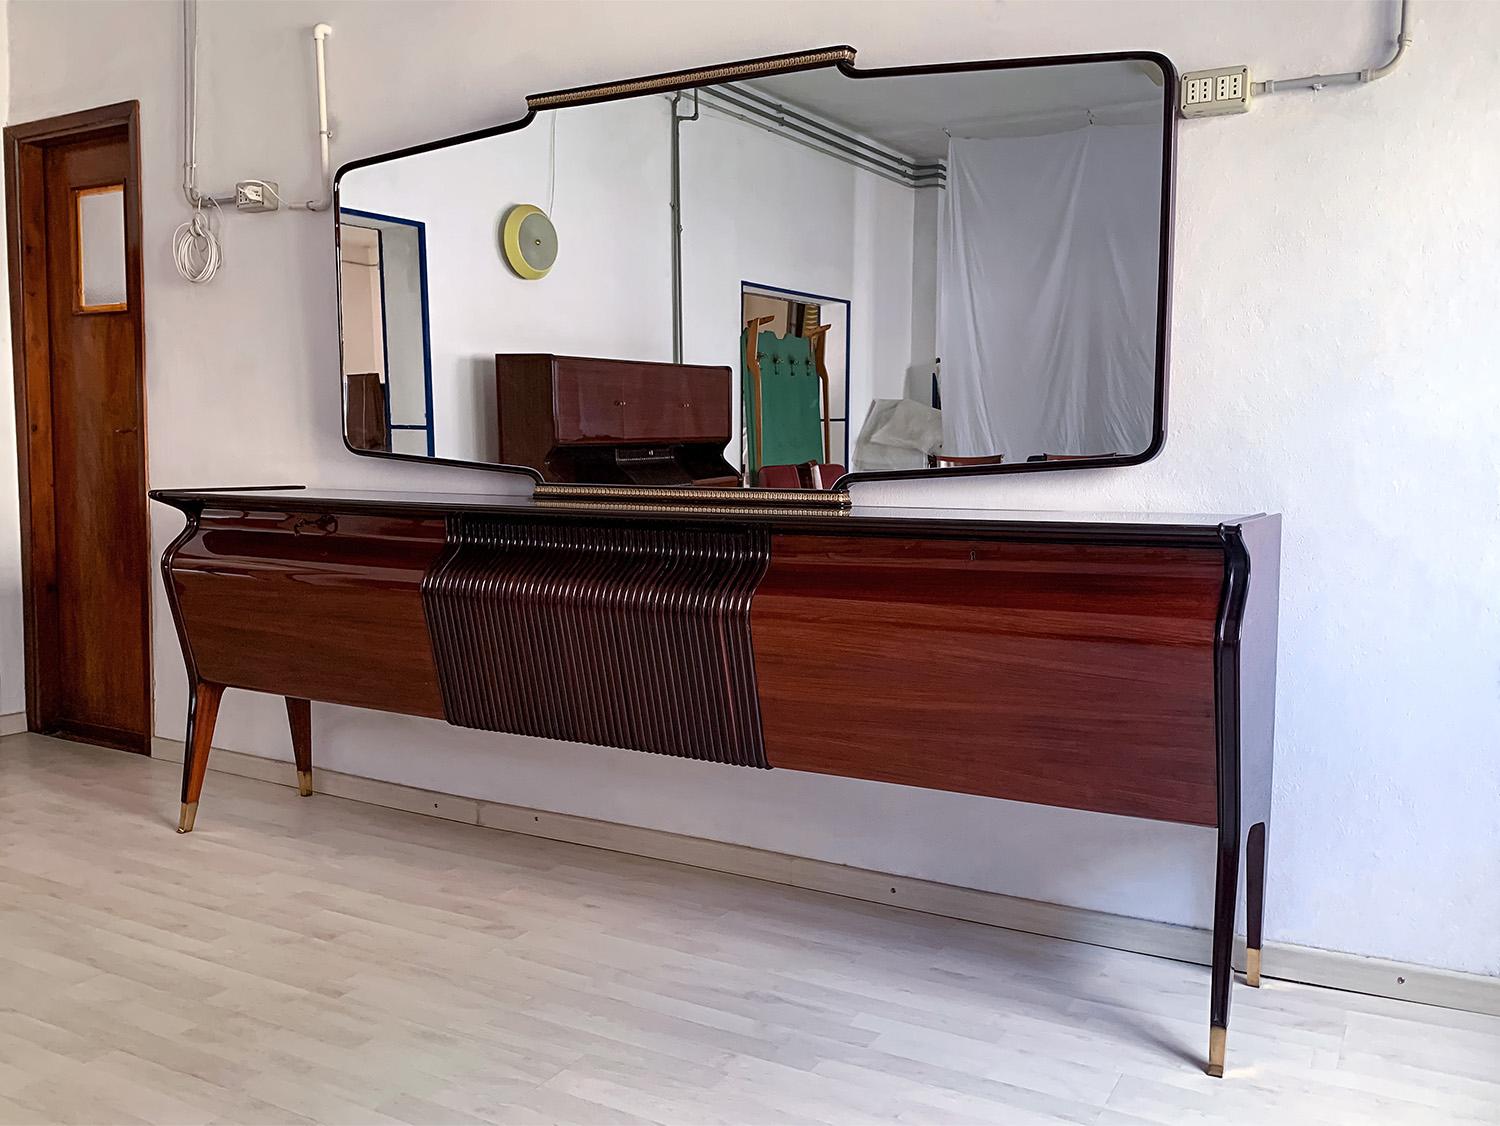 For your consideration this stylish living room set designed by Osvaldo Borsani, composed by: Sideboard with mirror, Bar cabinet and dining Table.

Really three great examples of midcentury Italian design, as well as even today they are a perfect